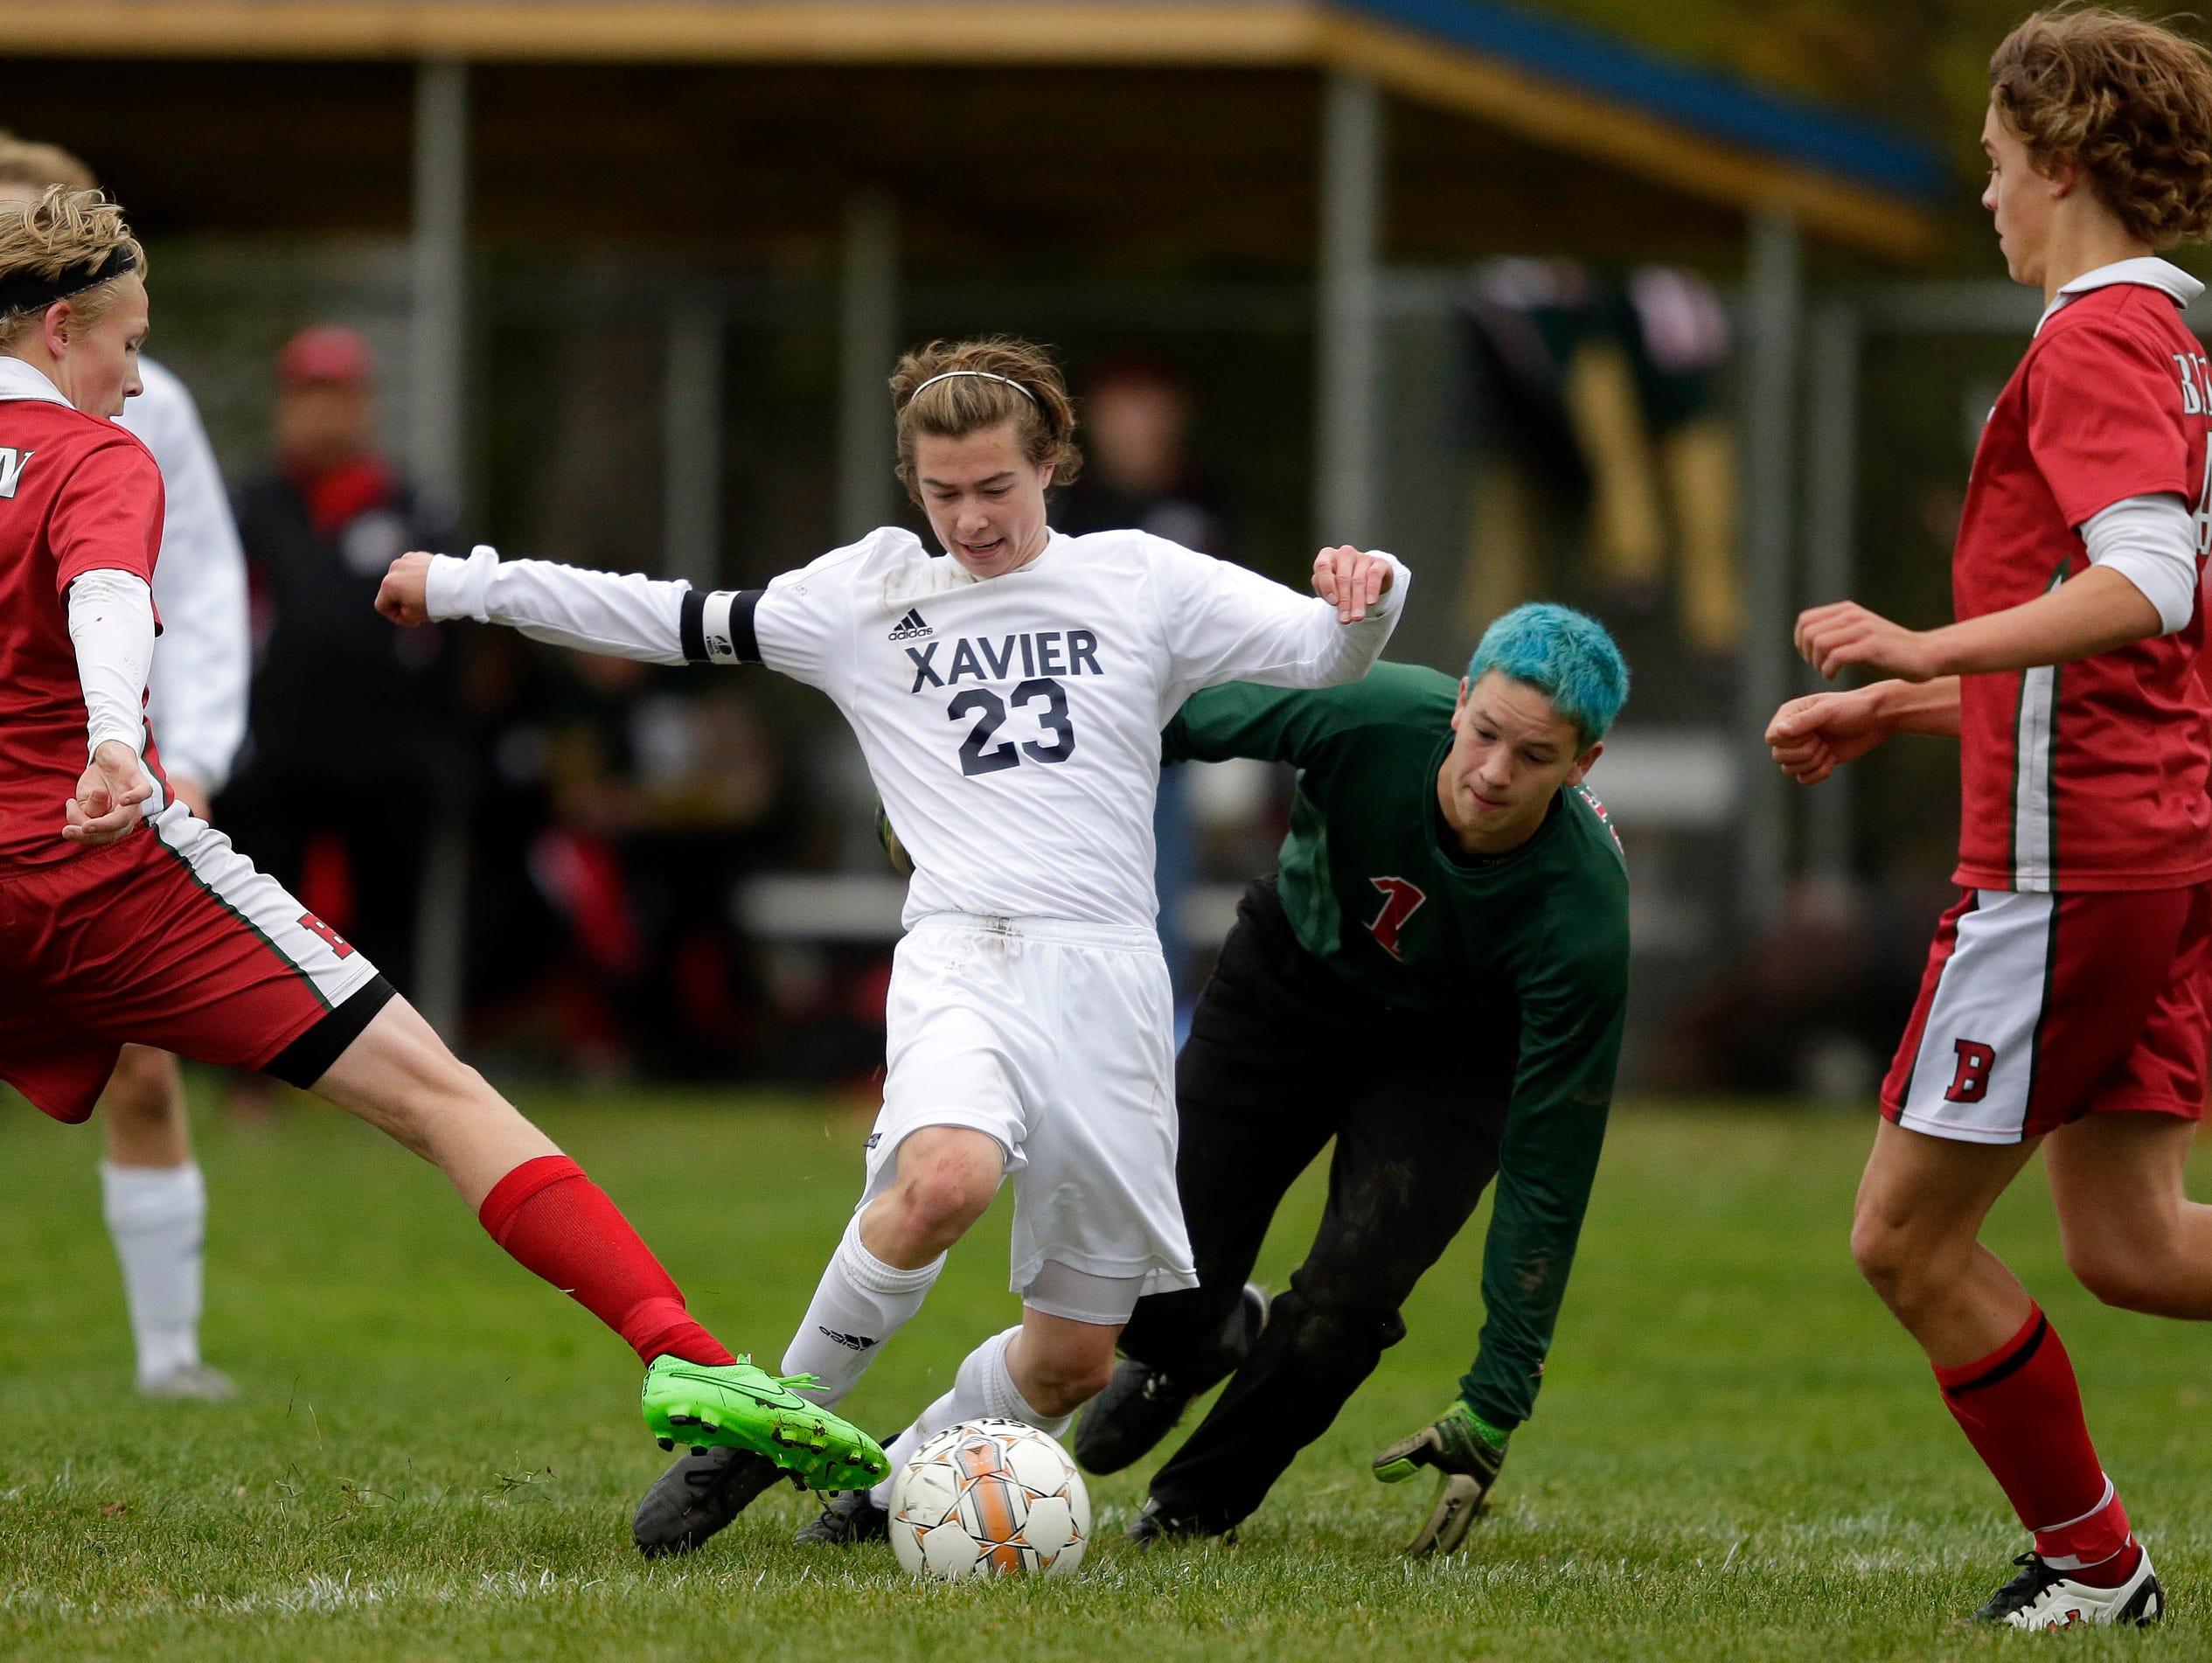 Seth Theilig of Xavier looks for an opening against Berlin in a Division 3 soccer regional championship game at Xavier High School in Appleton, Wis., Saturday, October 24, 2015. Ron Page/Post-Crescent Media